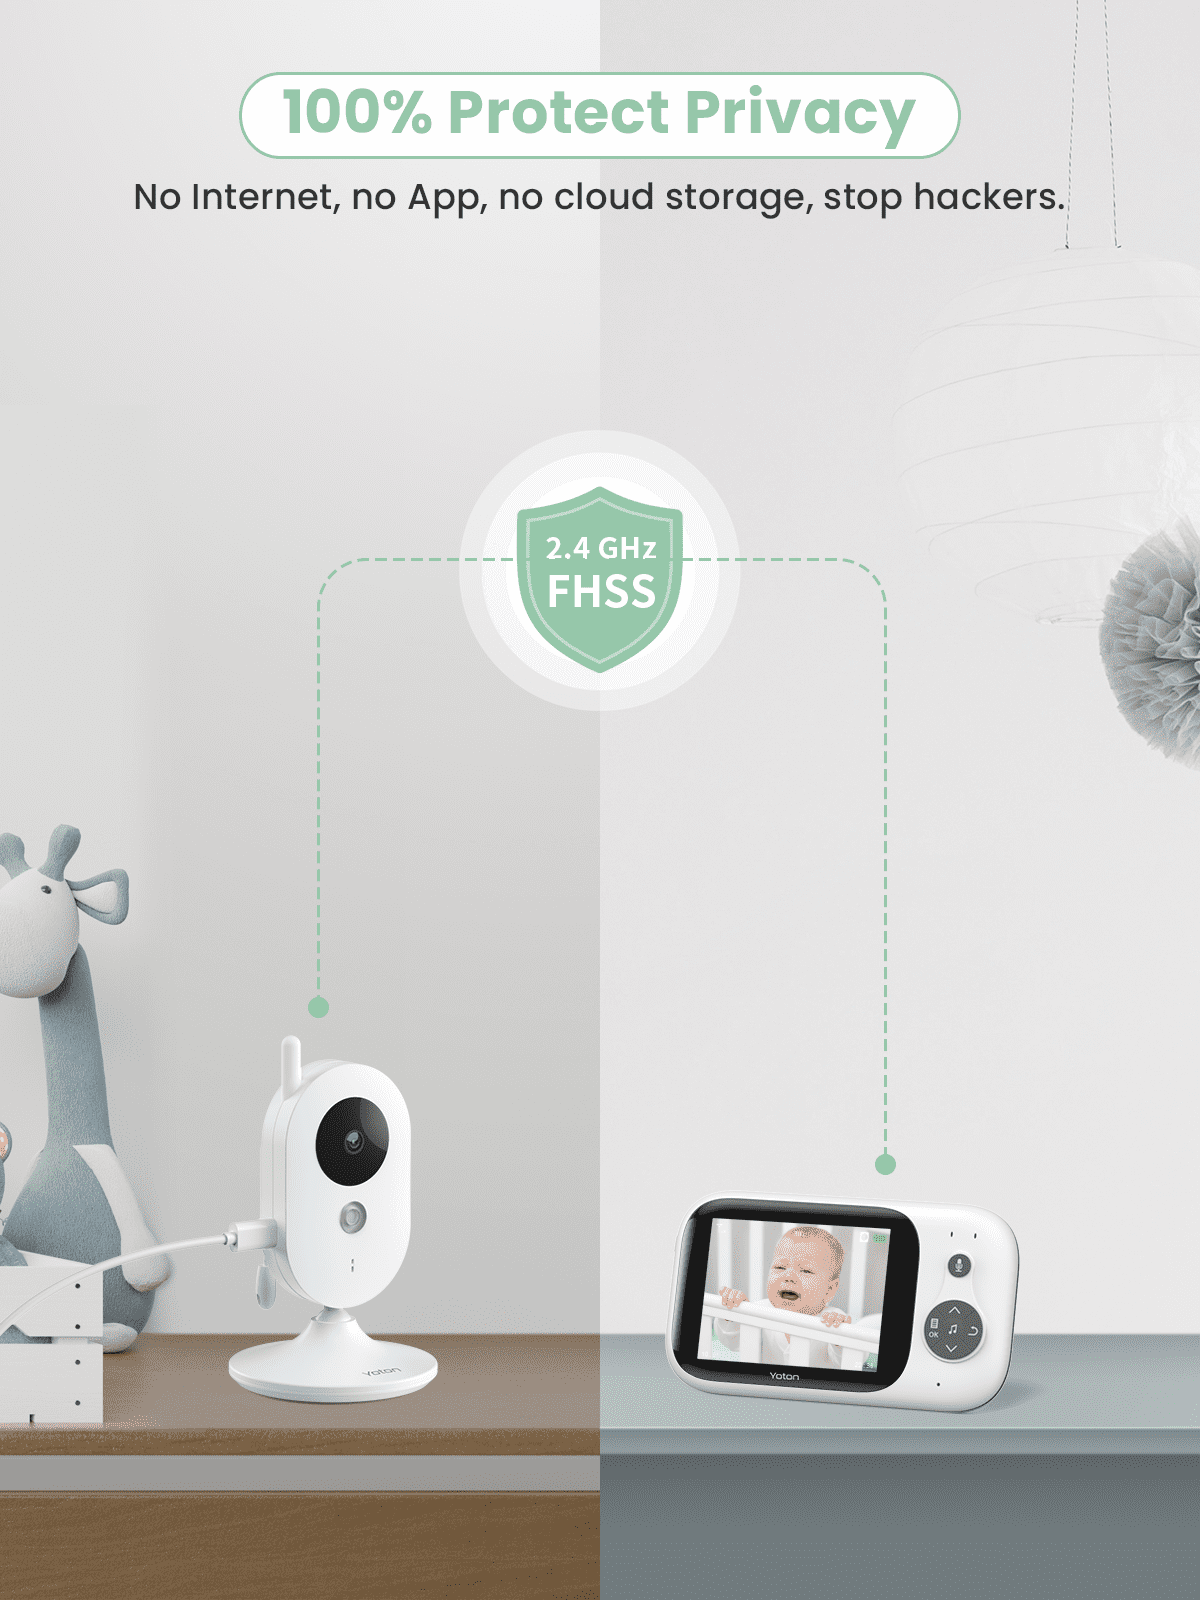 BABYPHONE CAMERA VICTURE BM45 VIDEO BABY MONITOR X0017L4K5Z - A2iS